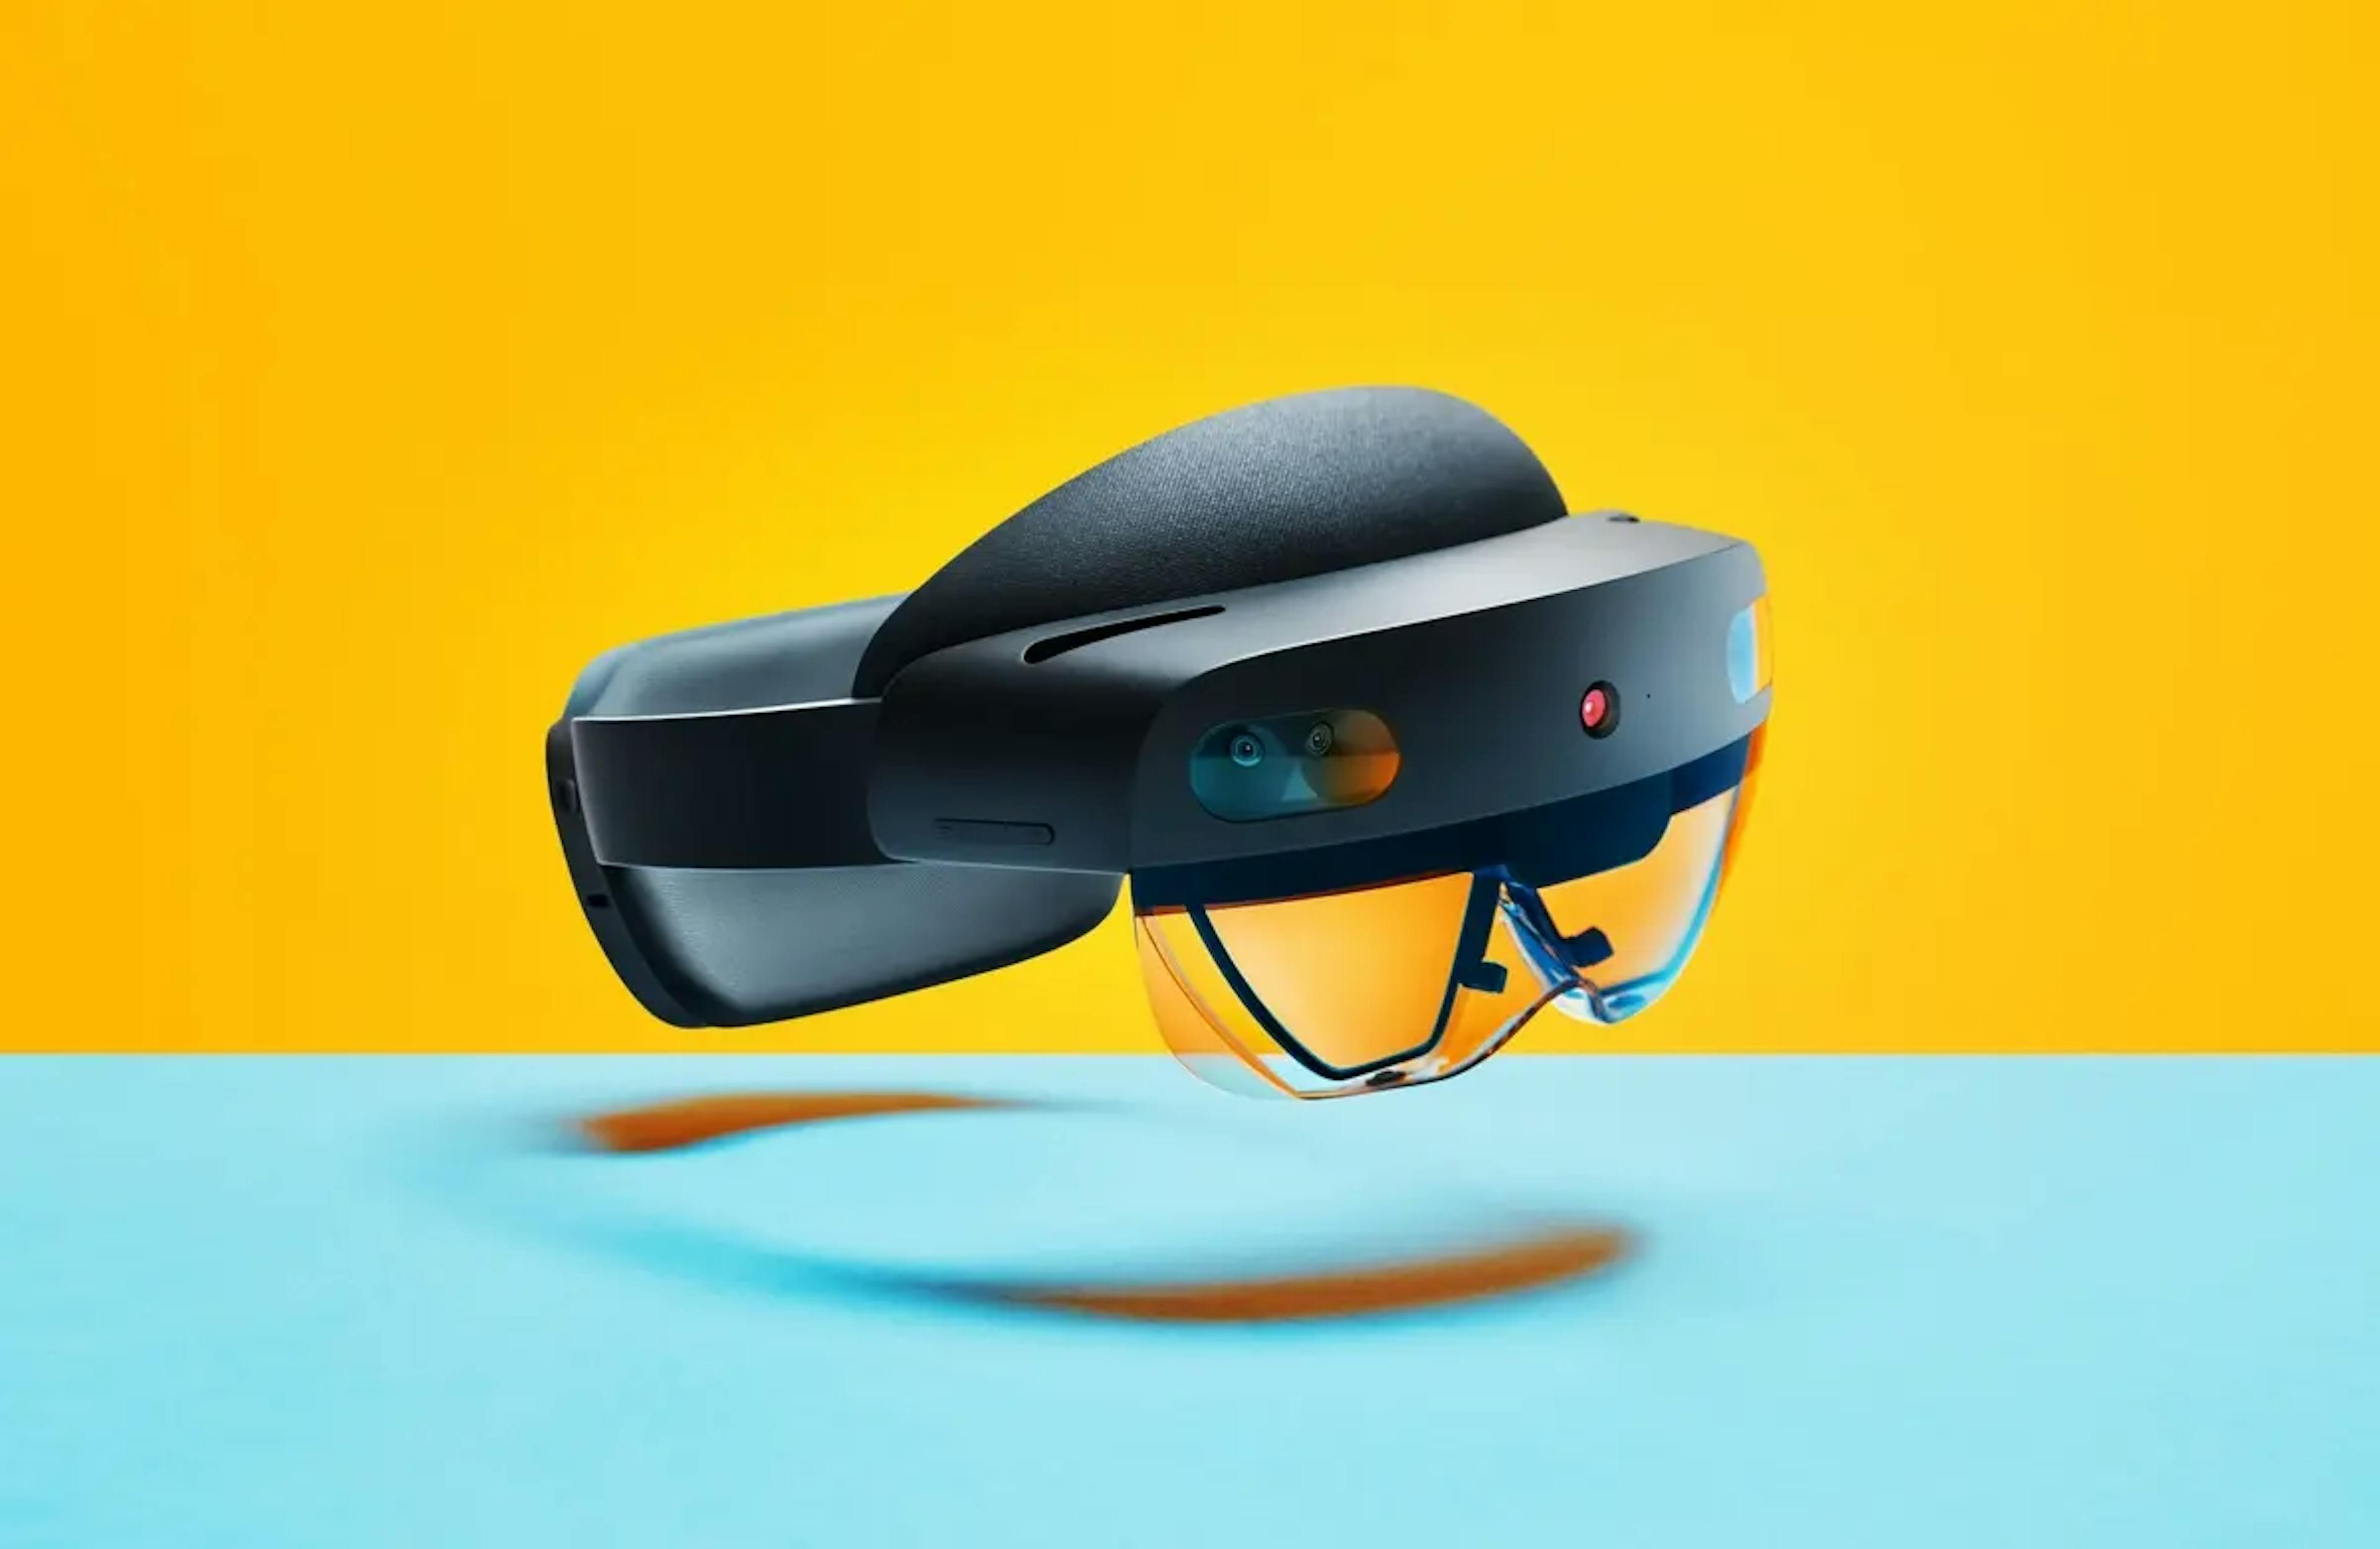 Hololens 2 - an AR headset developed and manufactured by Microsoft costs about $3500